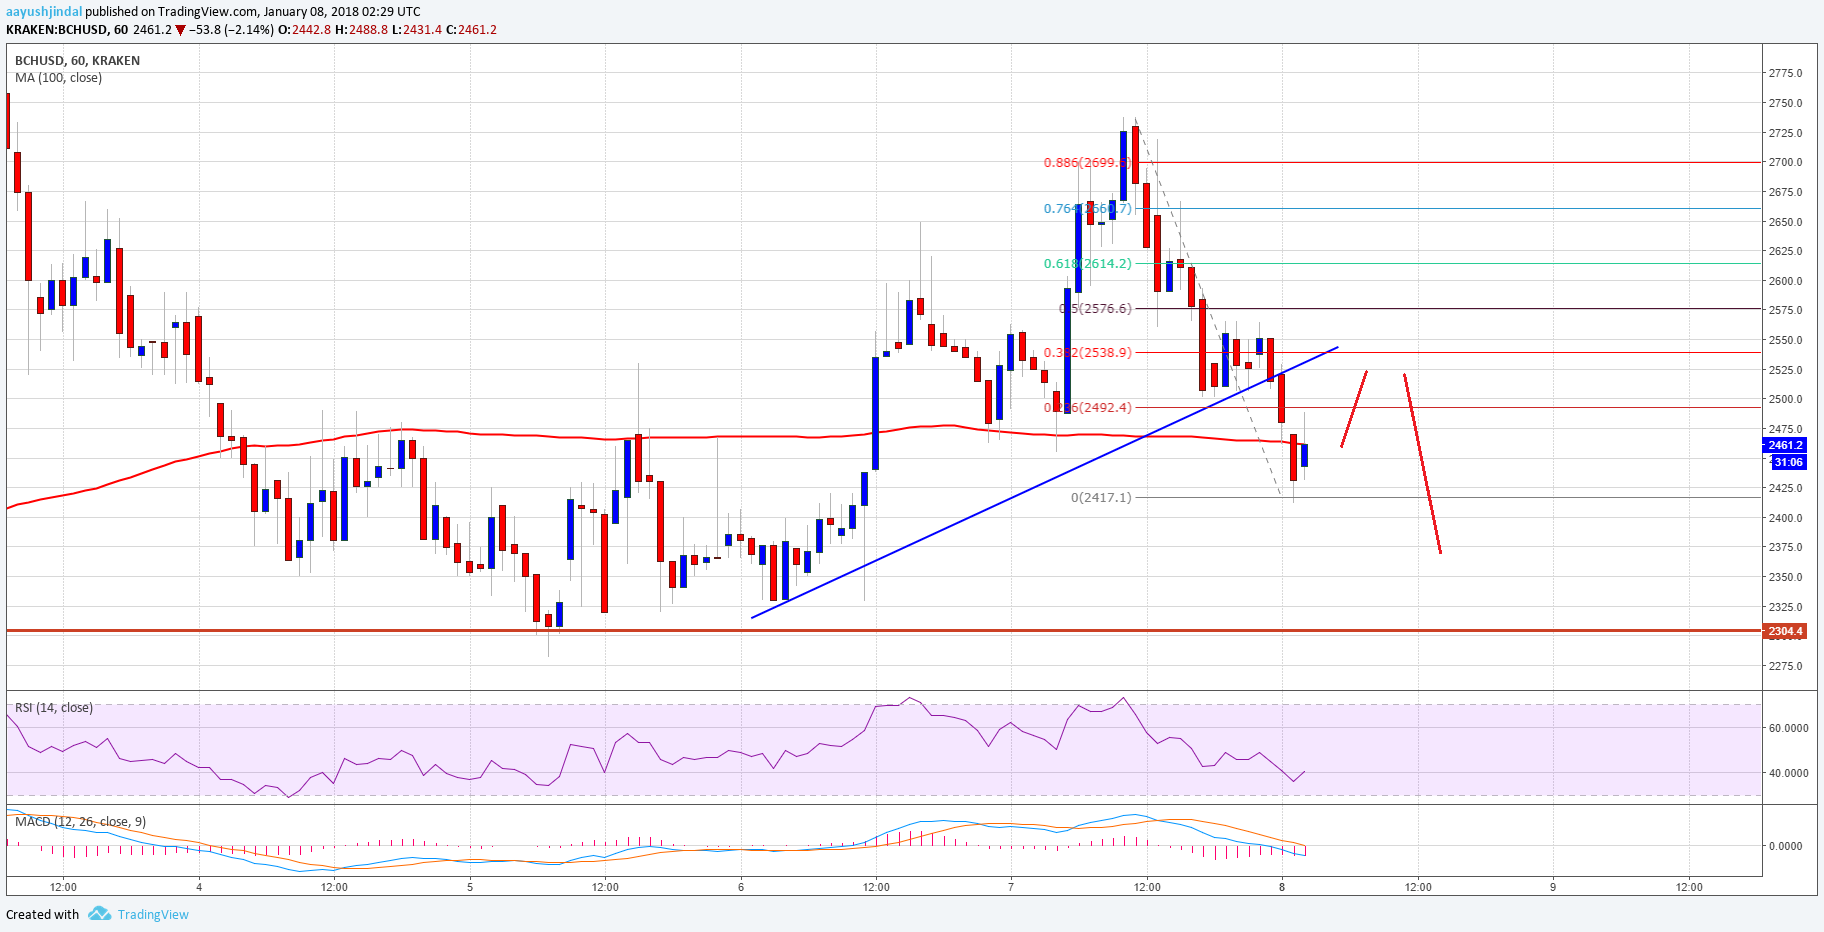 Bitcoin Cash Price Technical Analysis – BCH/USD to Retest $2300